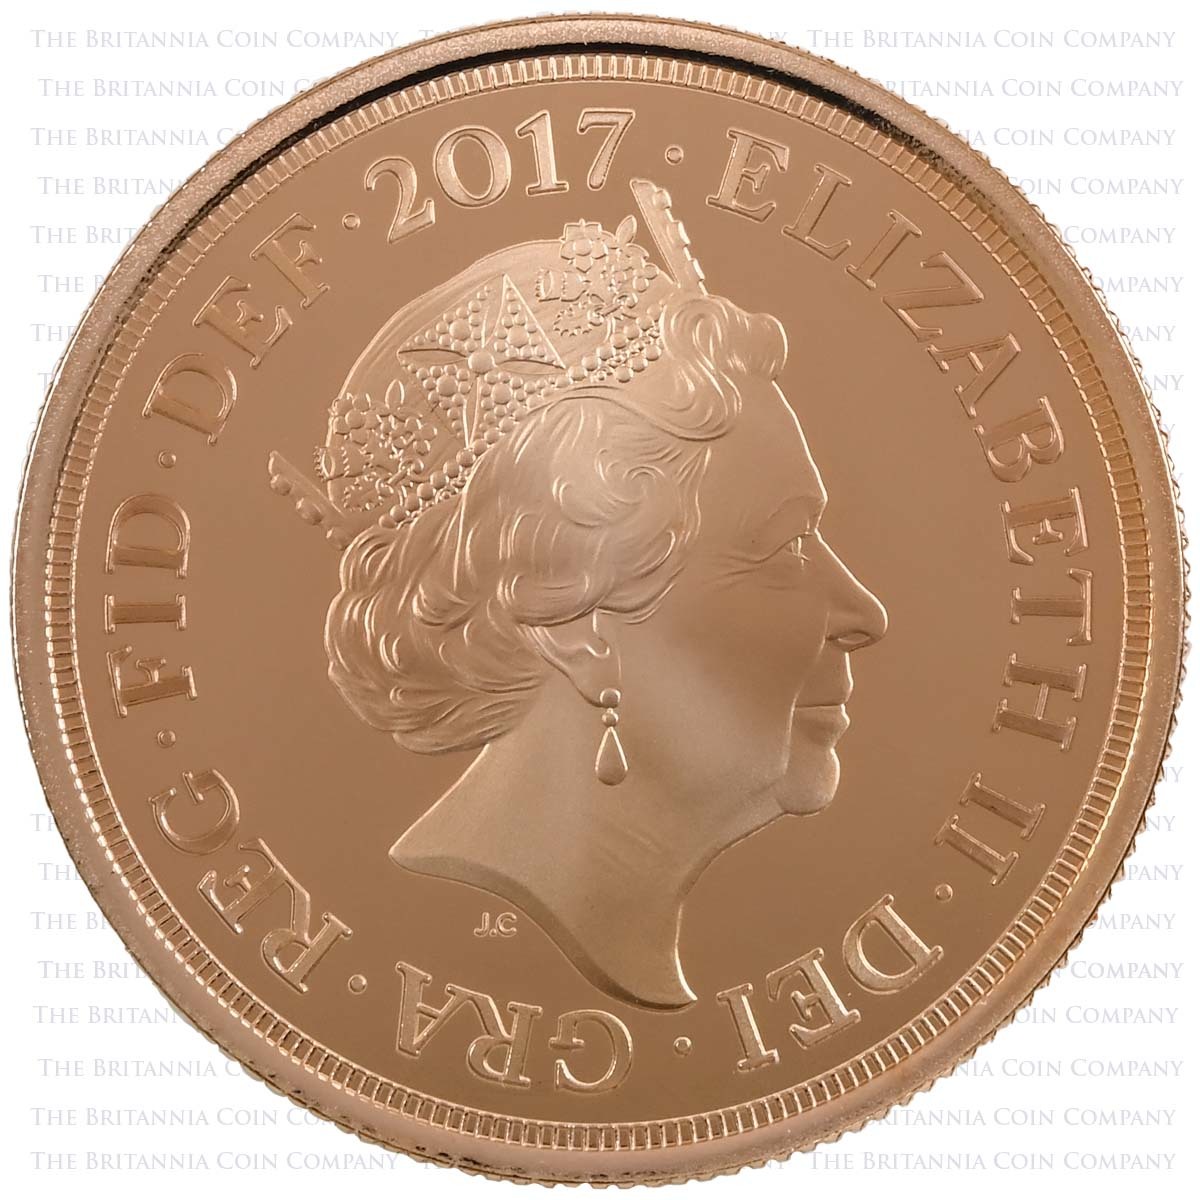 SV317 2017 Elizabeth II 3 Coin Gold Proof Sovereign Set 200th Anniversary Obverse